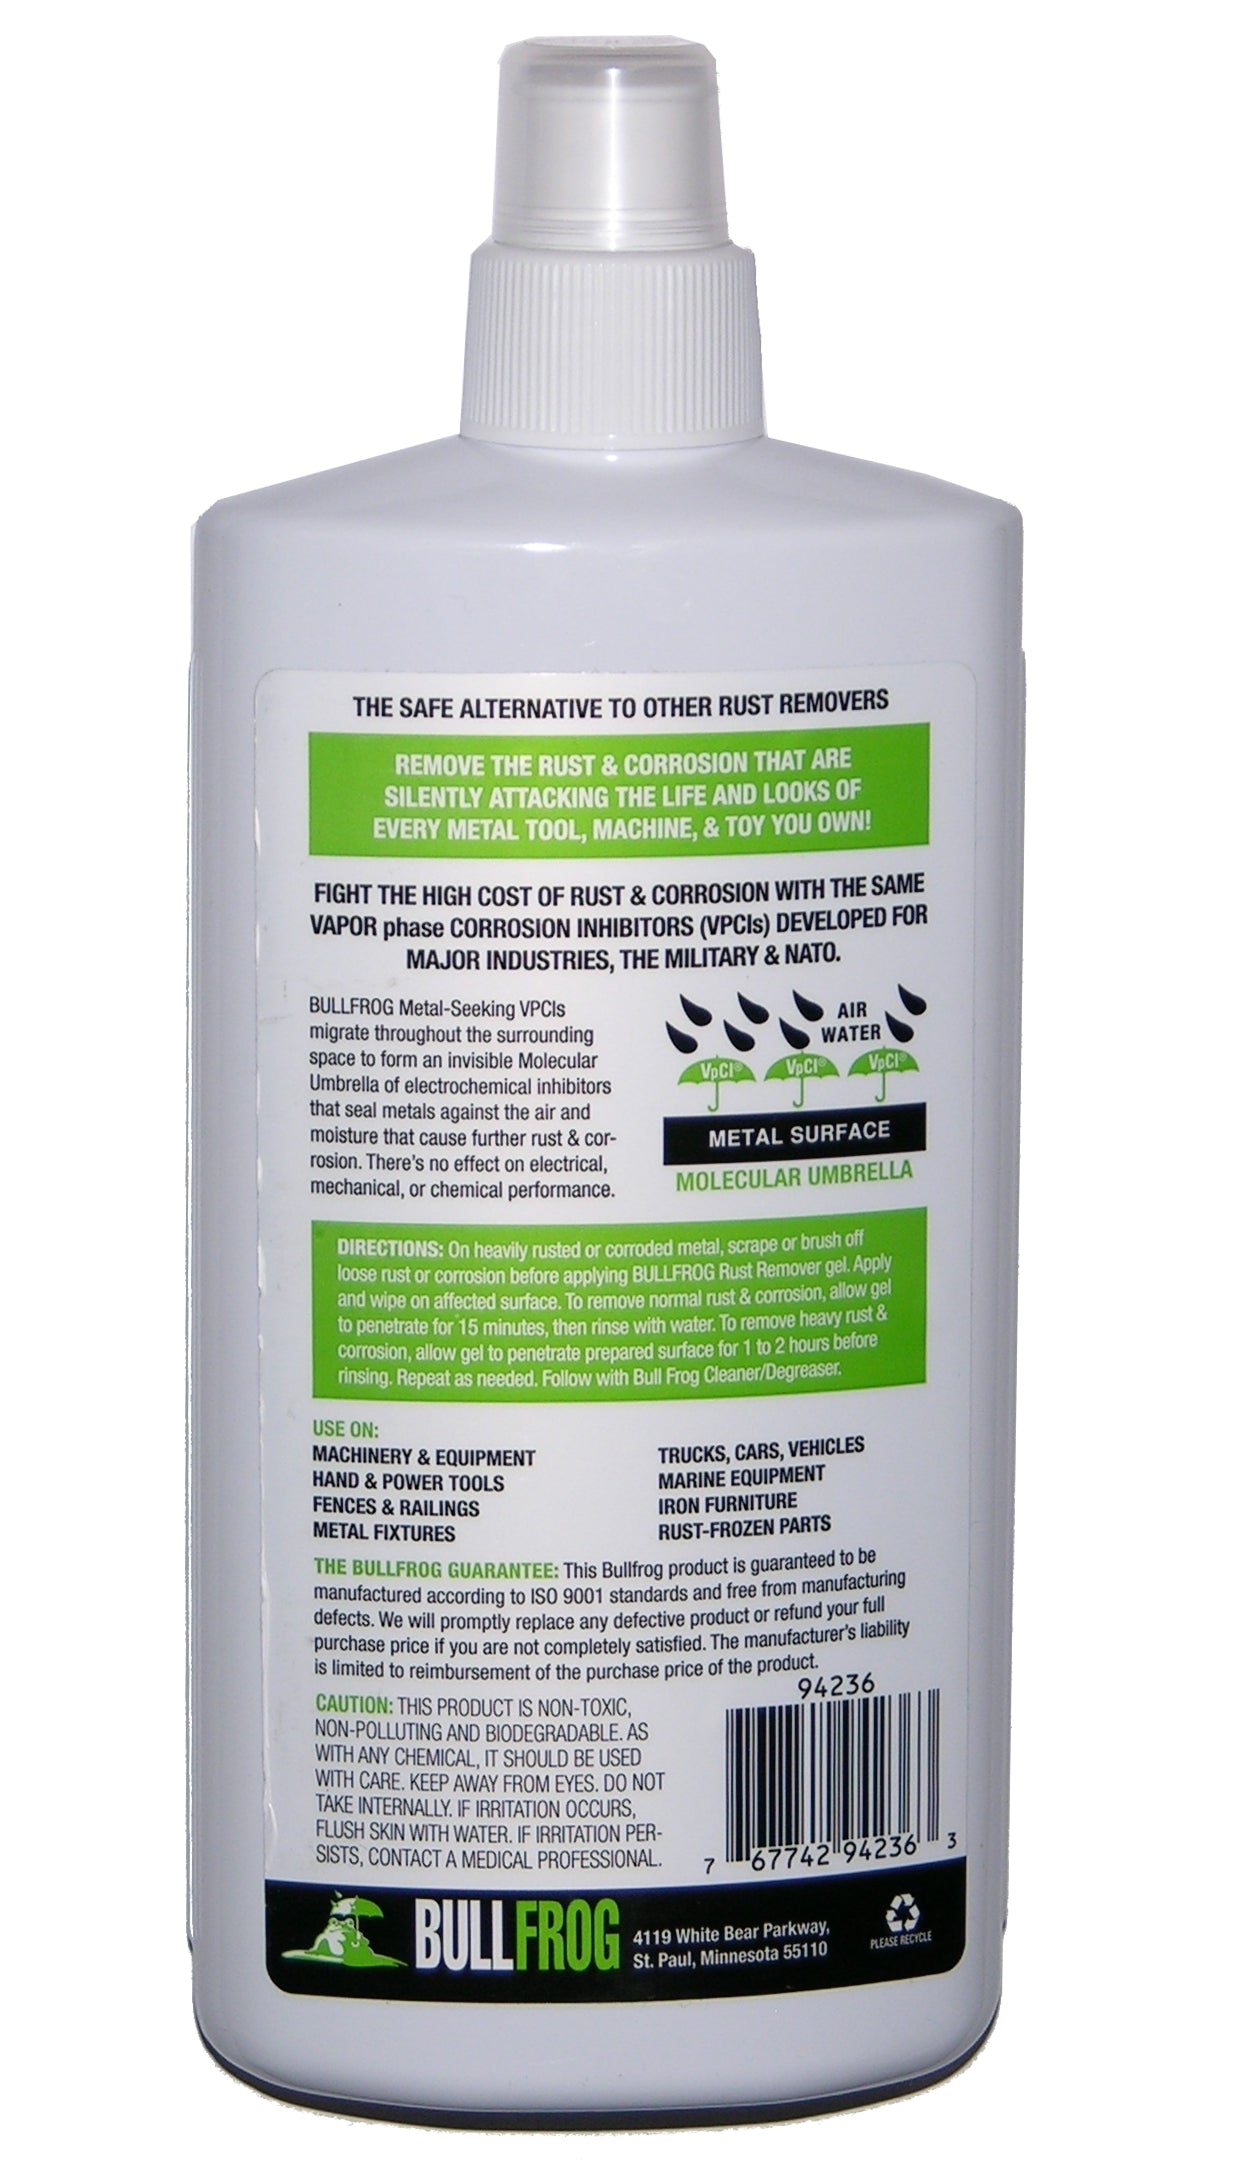 Bull Frog, Bull Frog 94236 Non-Toxic Rust Remover Easy, Safe, Removes Rust, Corrosion, 16oz